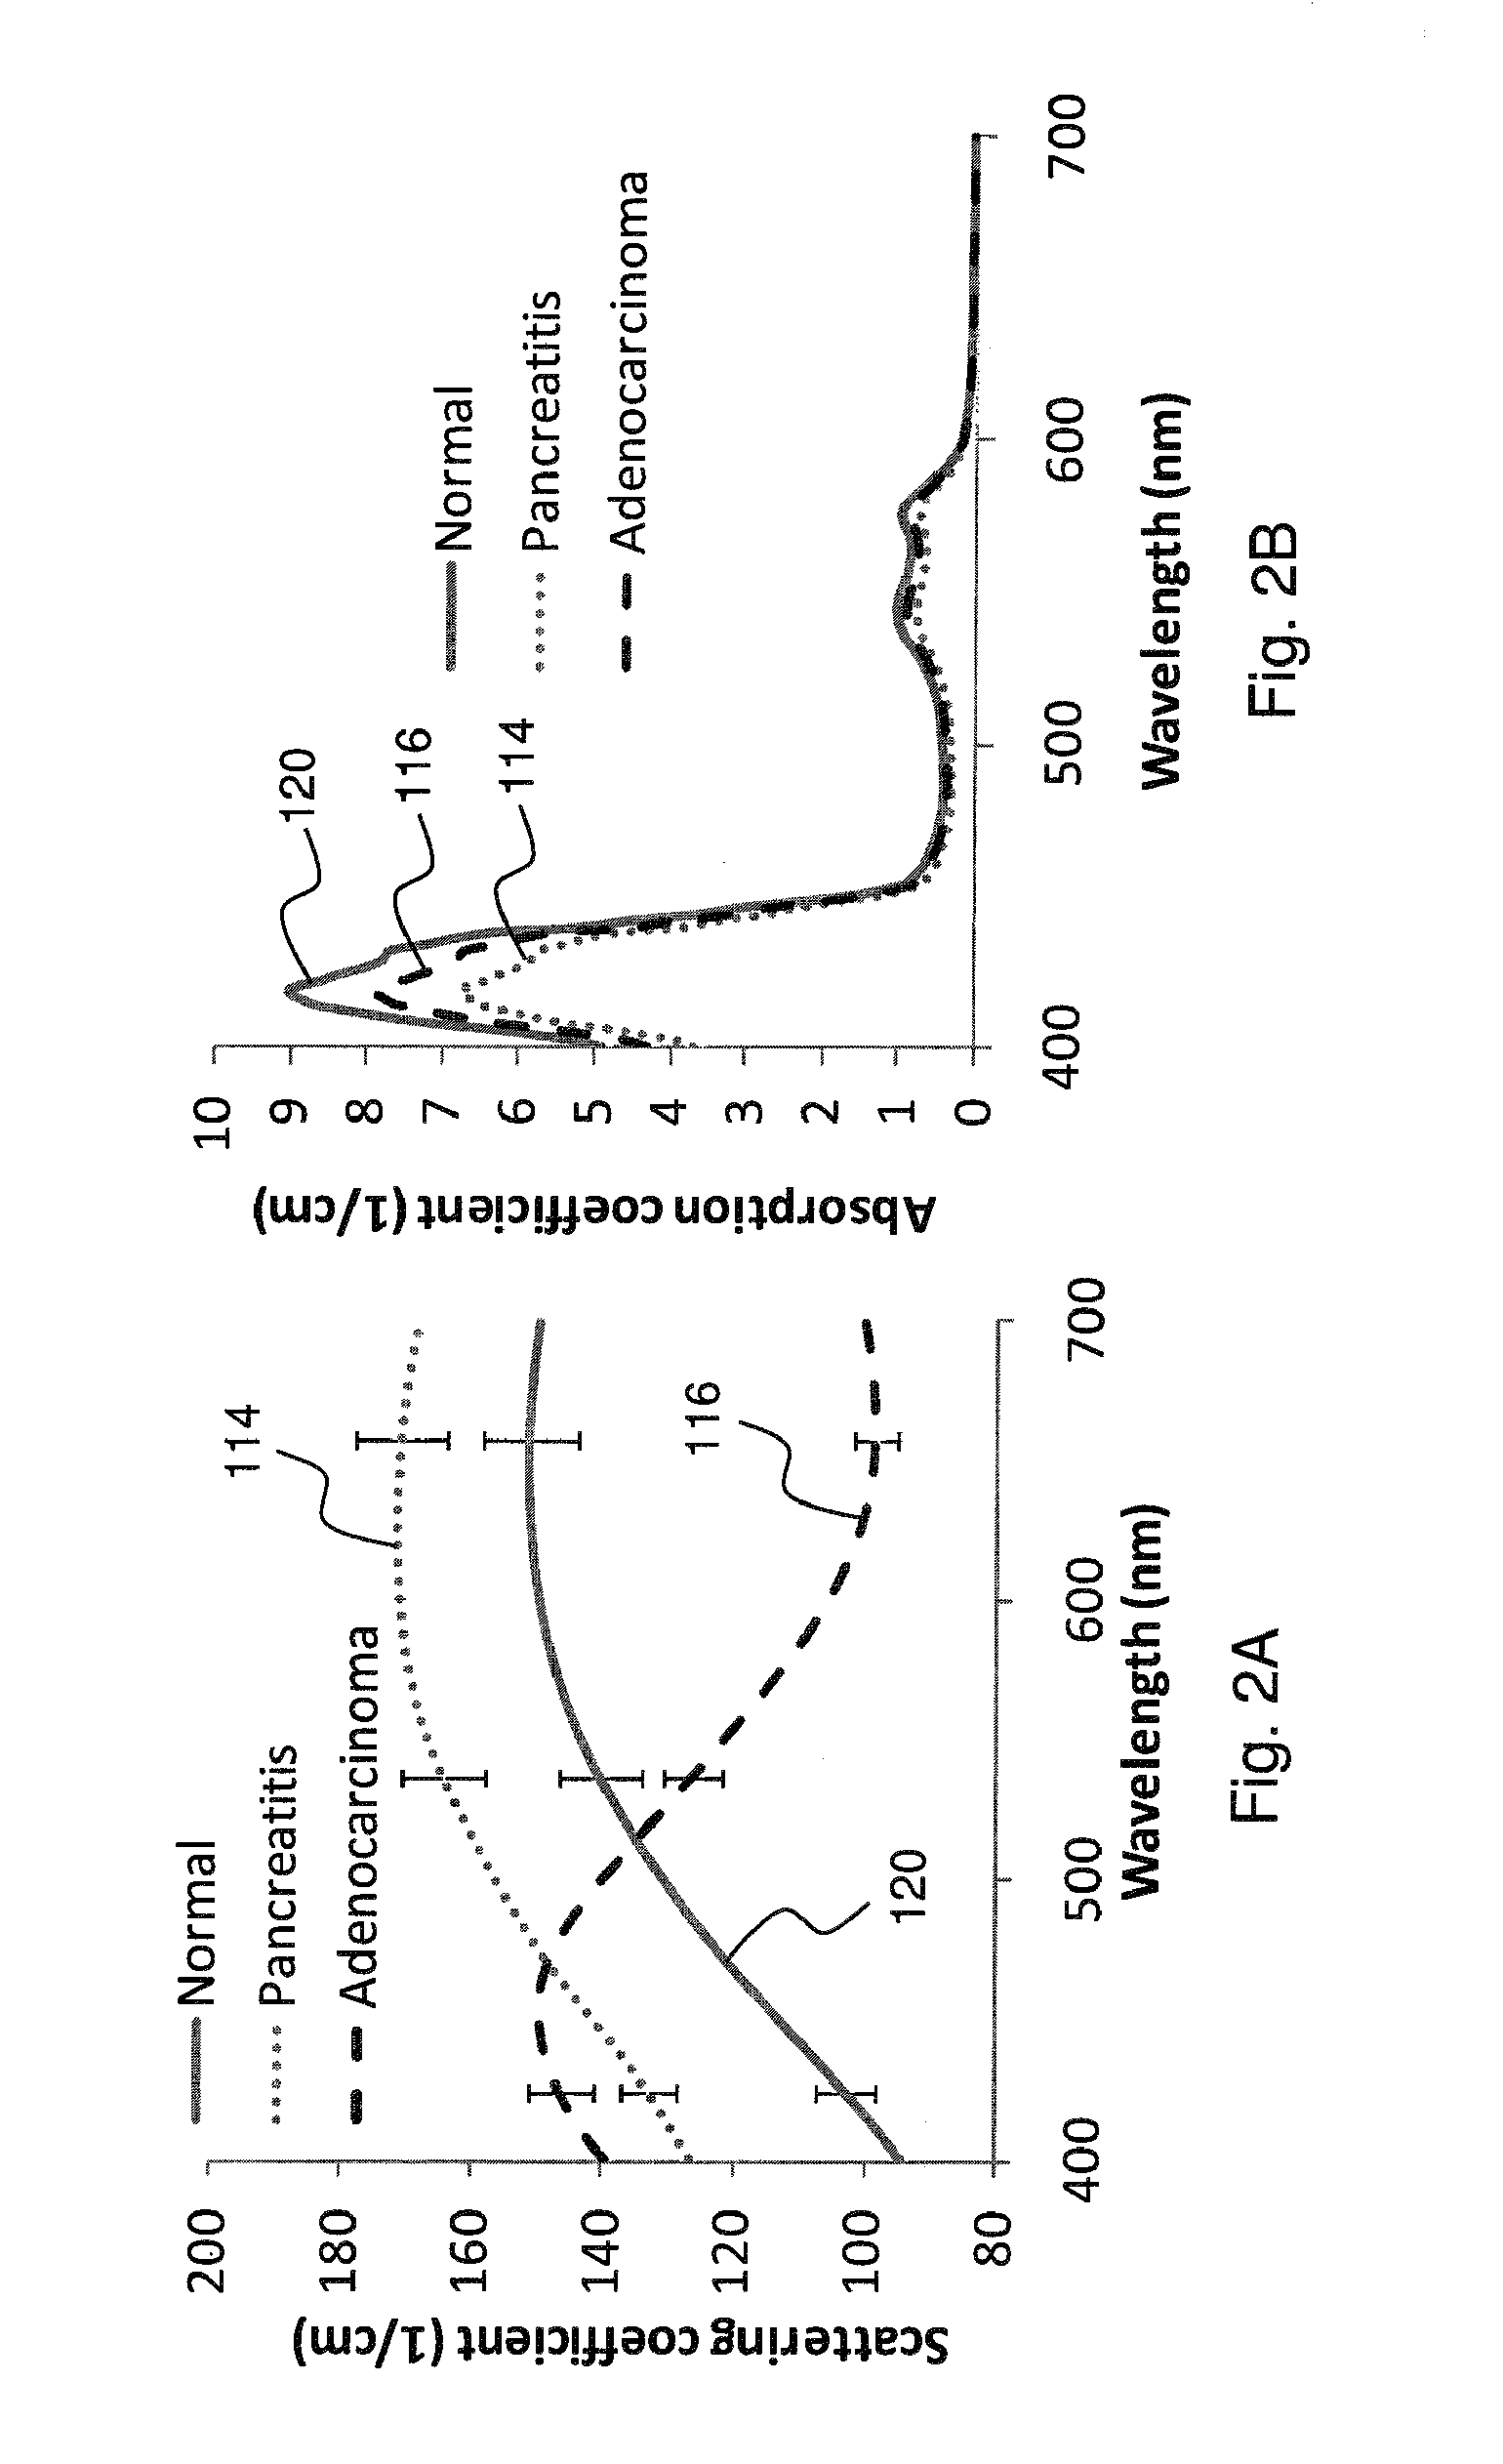 Multimodal spectroscopic systems and methods for classifying biological tissue